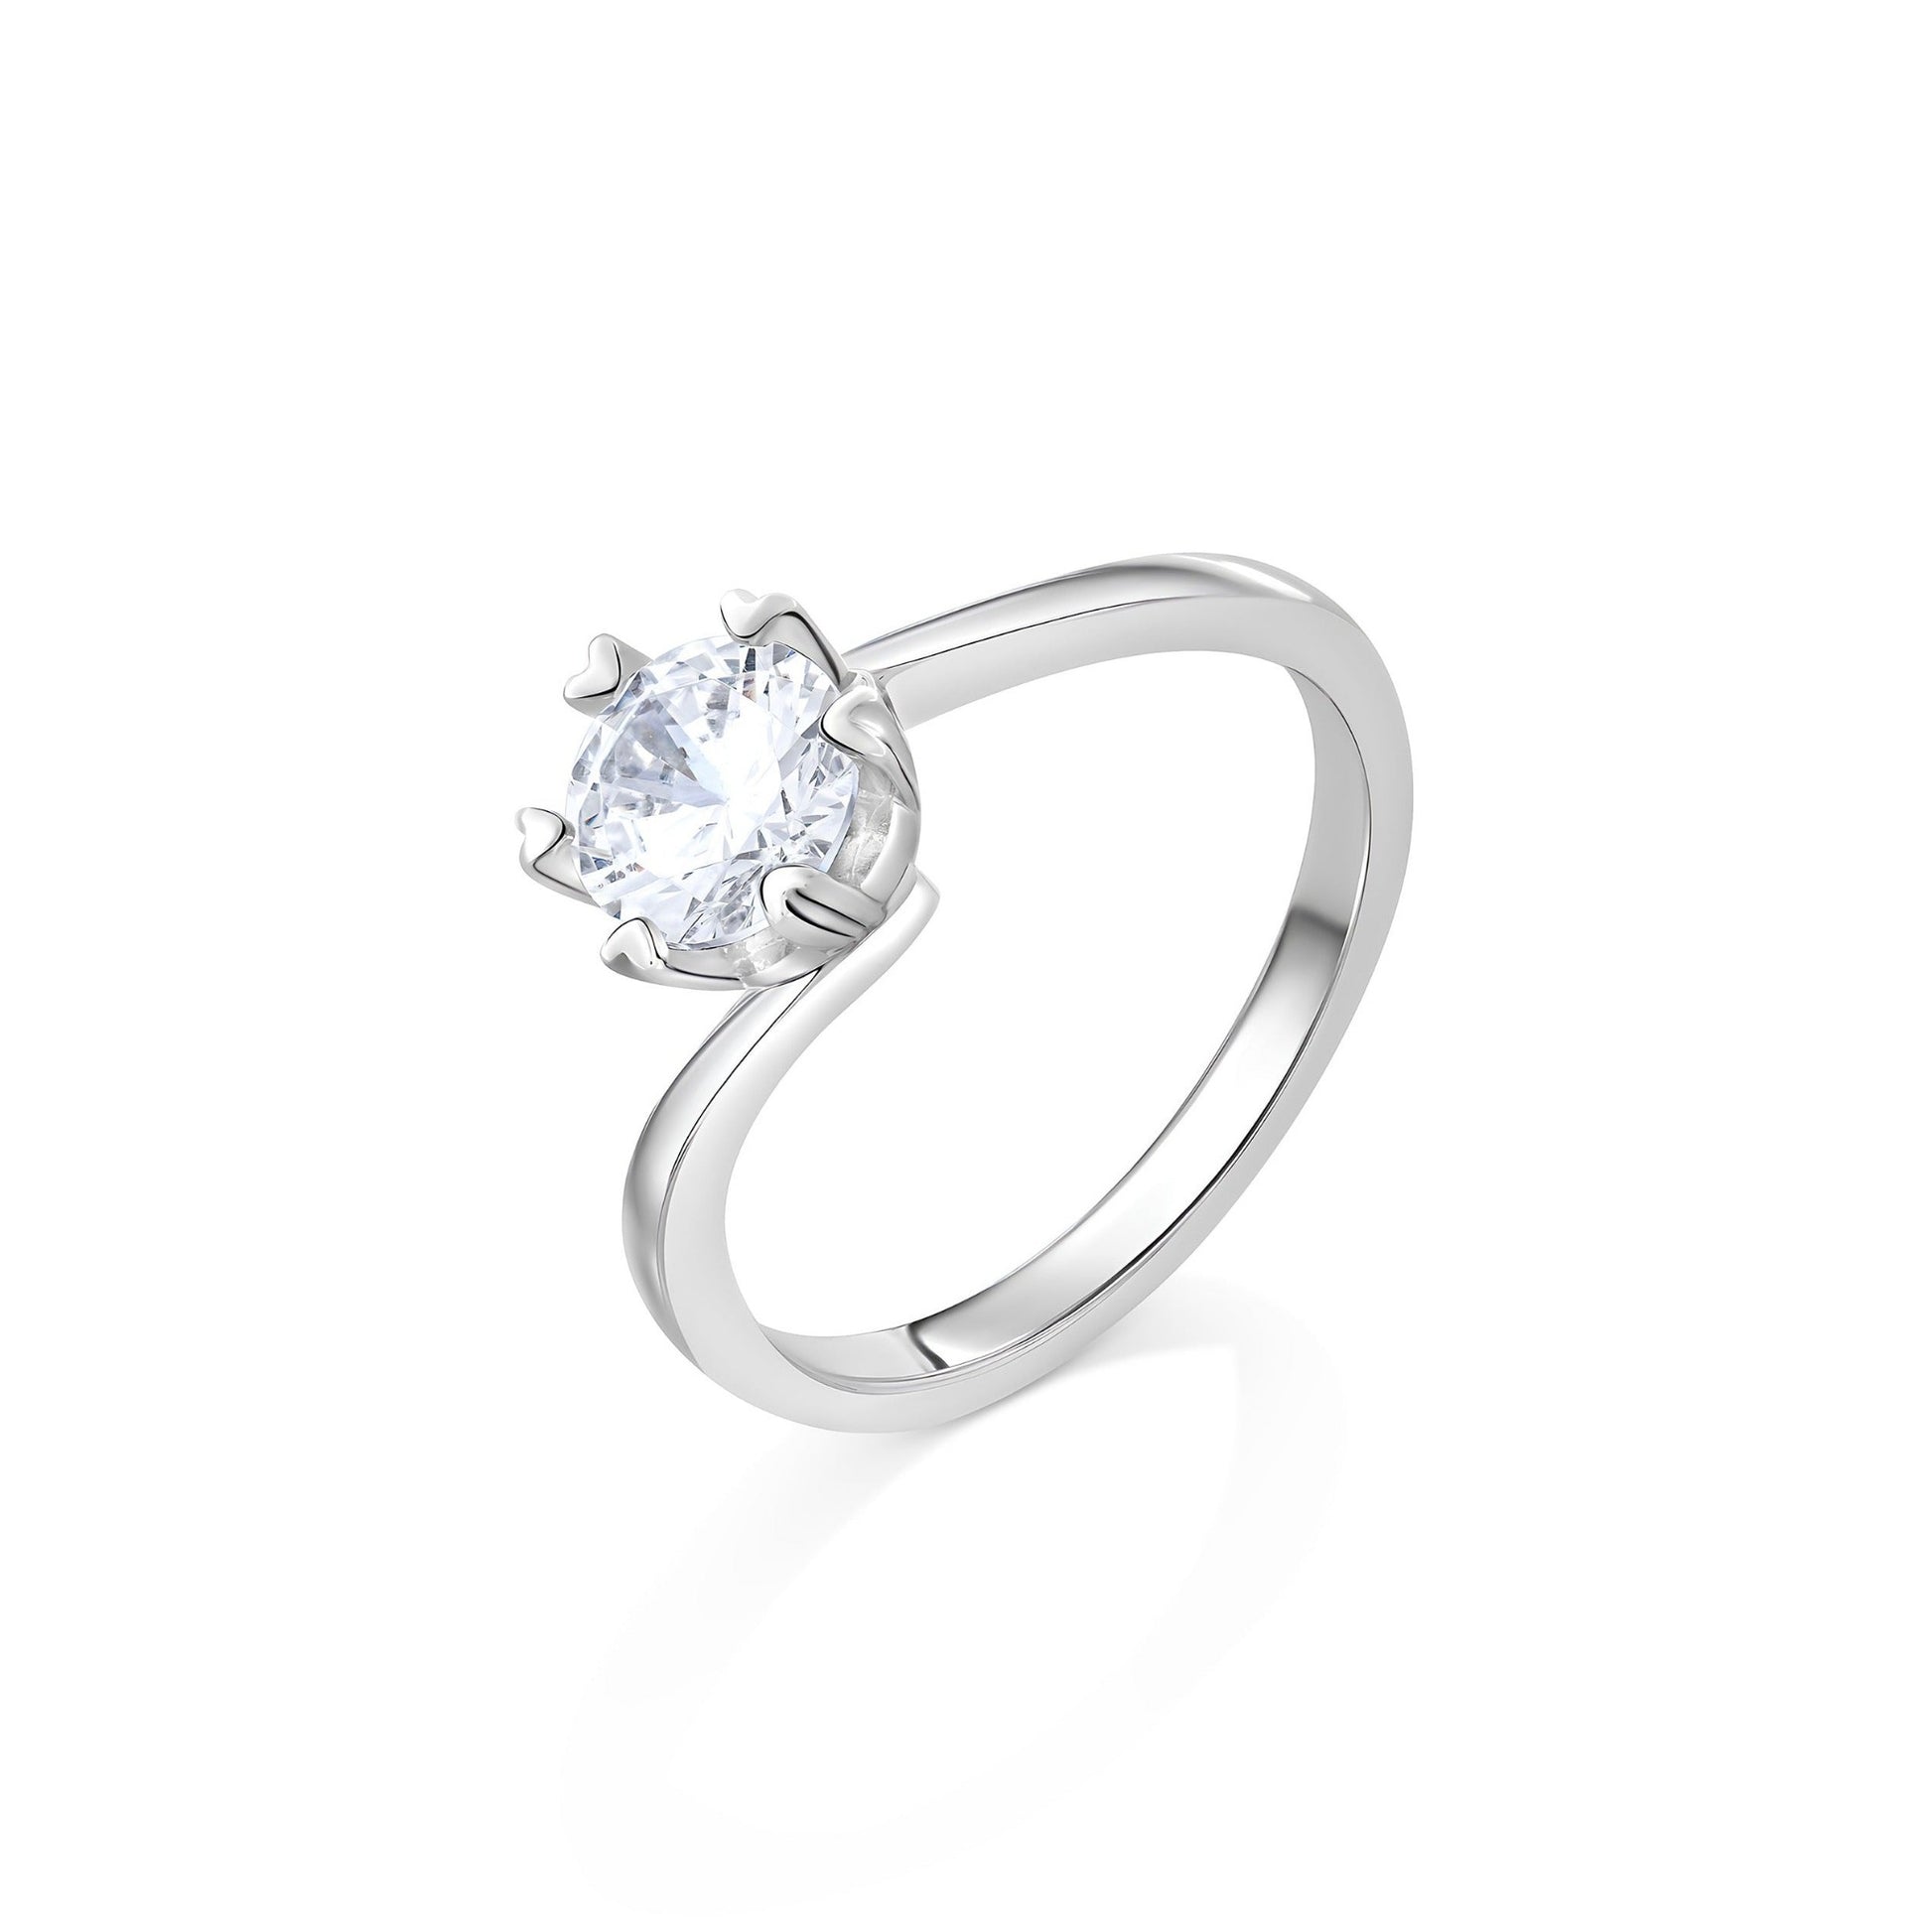 Aqua Round Cut Cubic Zirconia 925 silver Engagement Ring on white background.